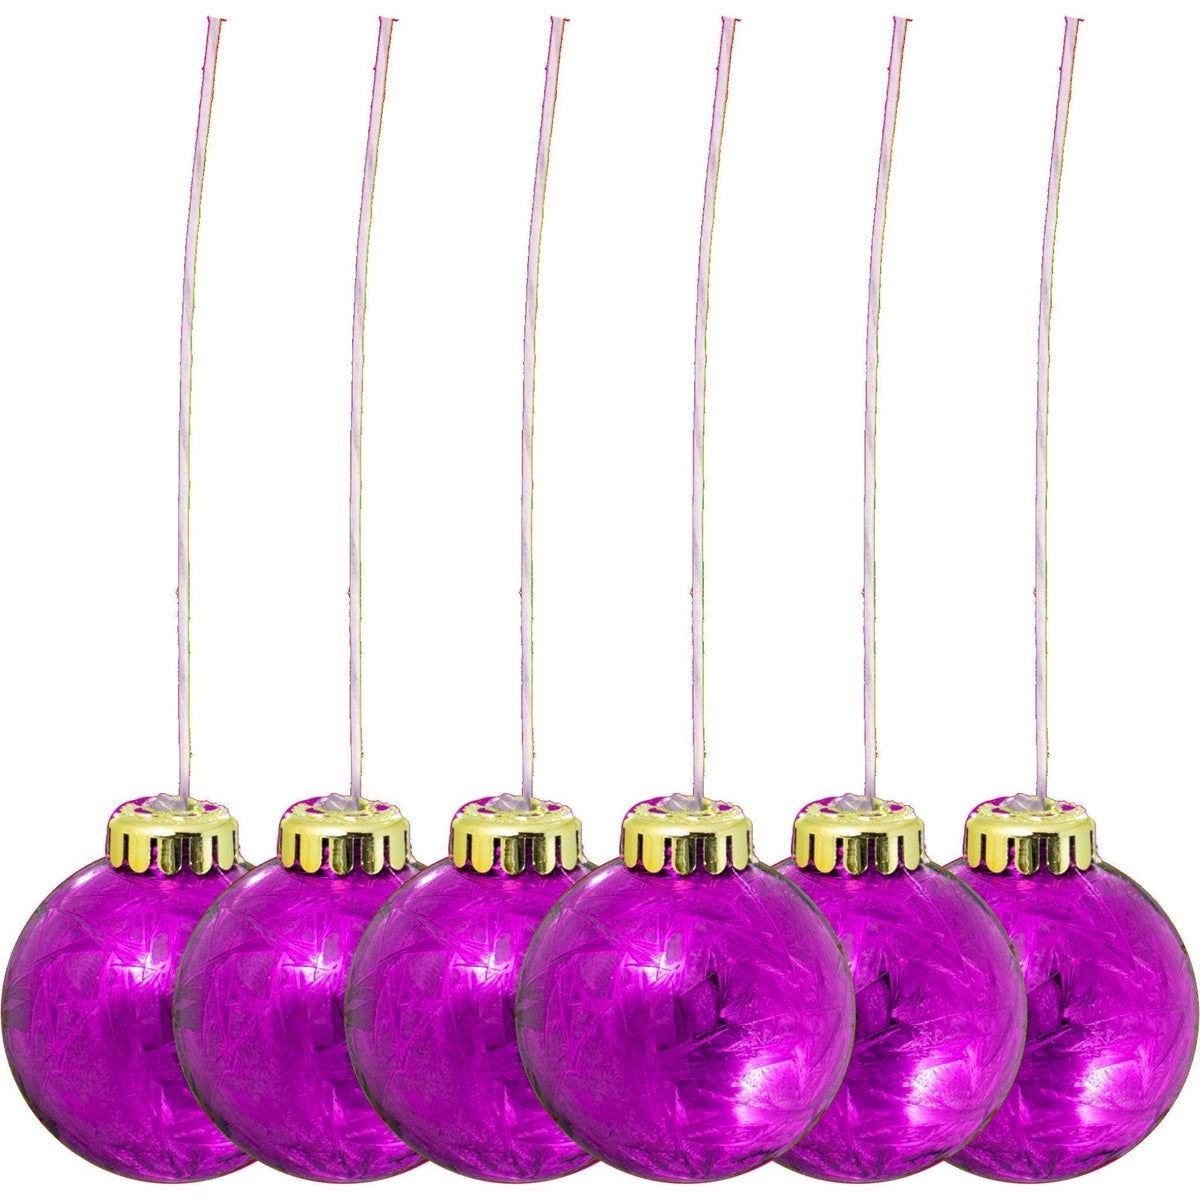 Lee Display offers brand new Shiny Fuscia Sequin Pink Plastic Ball Ornaments at wholesale prices for affordable Christmas Tree Hanging and Holiday Decorating on sale at leedisplay.com